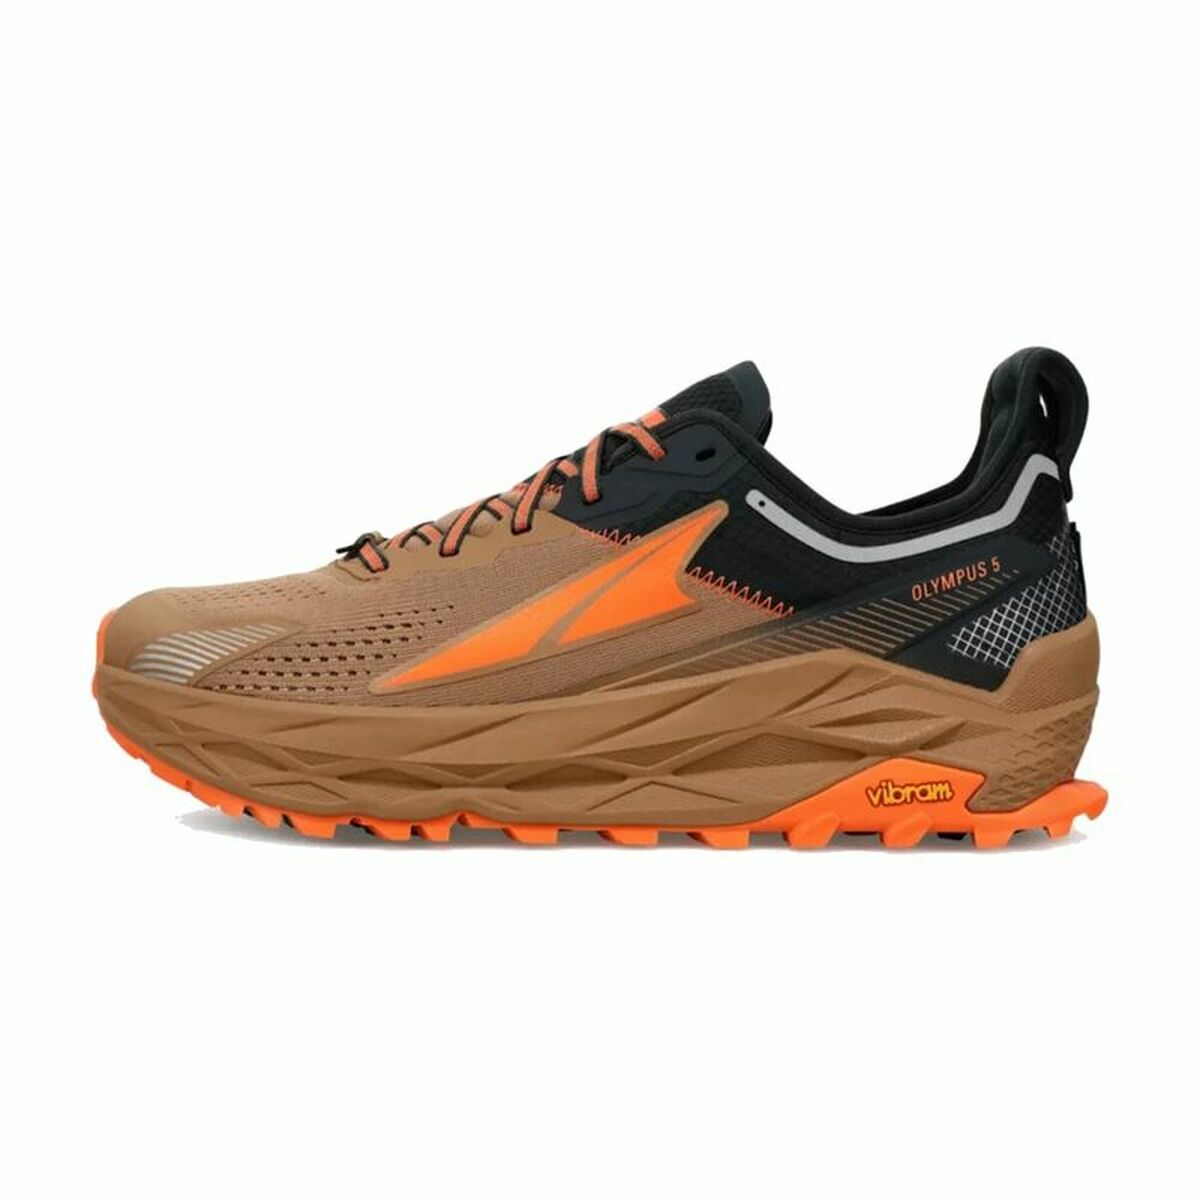 Chaussures de Running pour Adultes Altra Olympus 5 Marron Homme